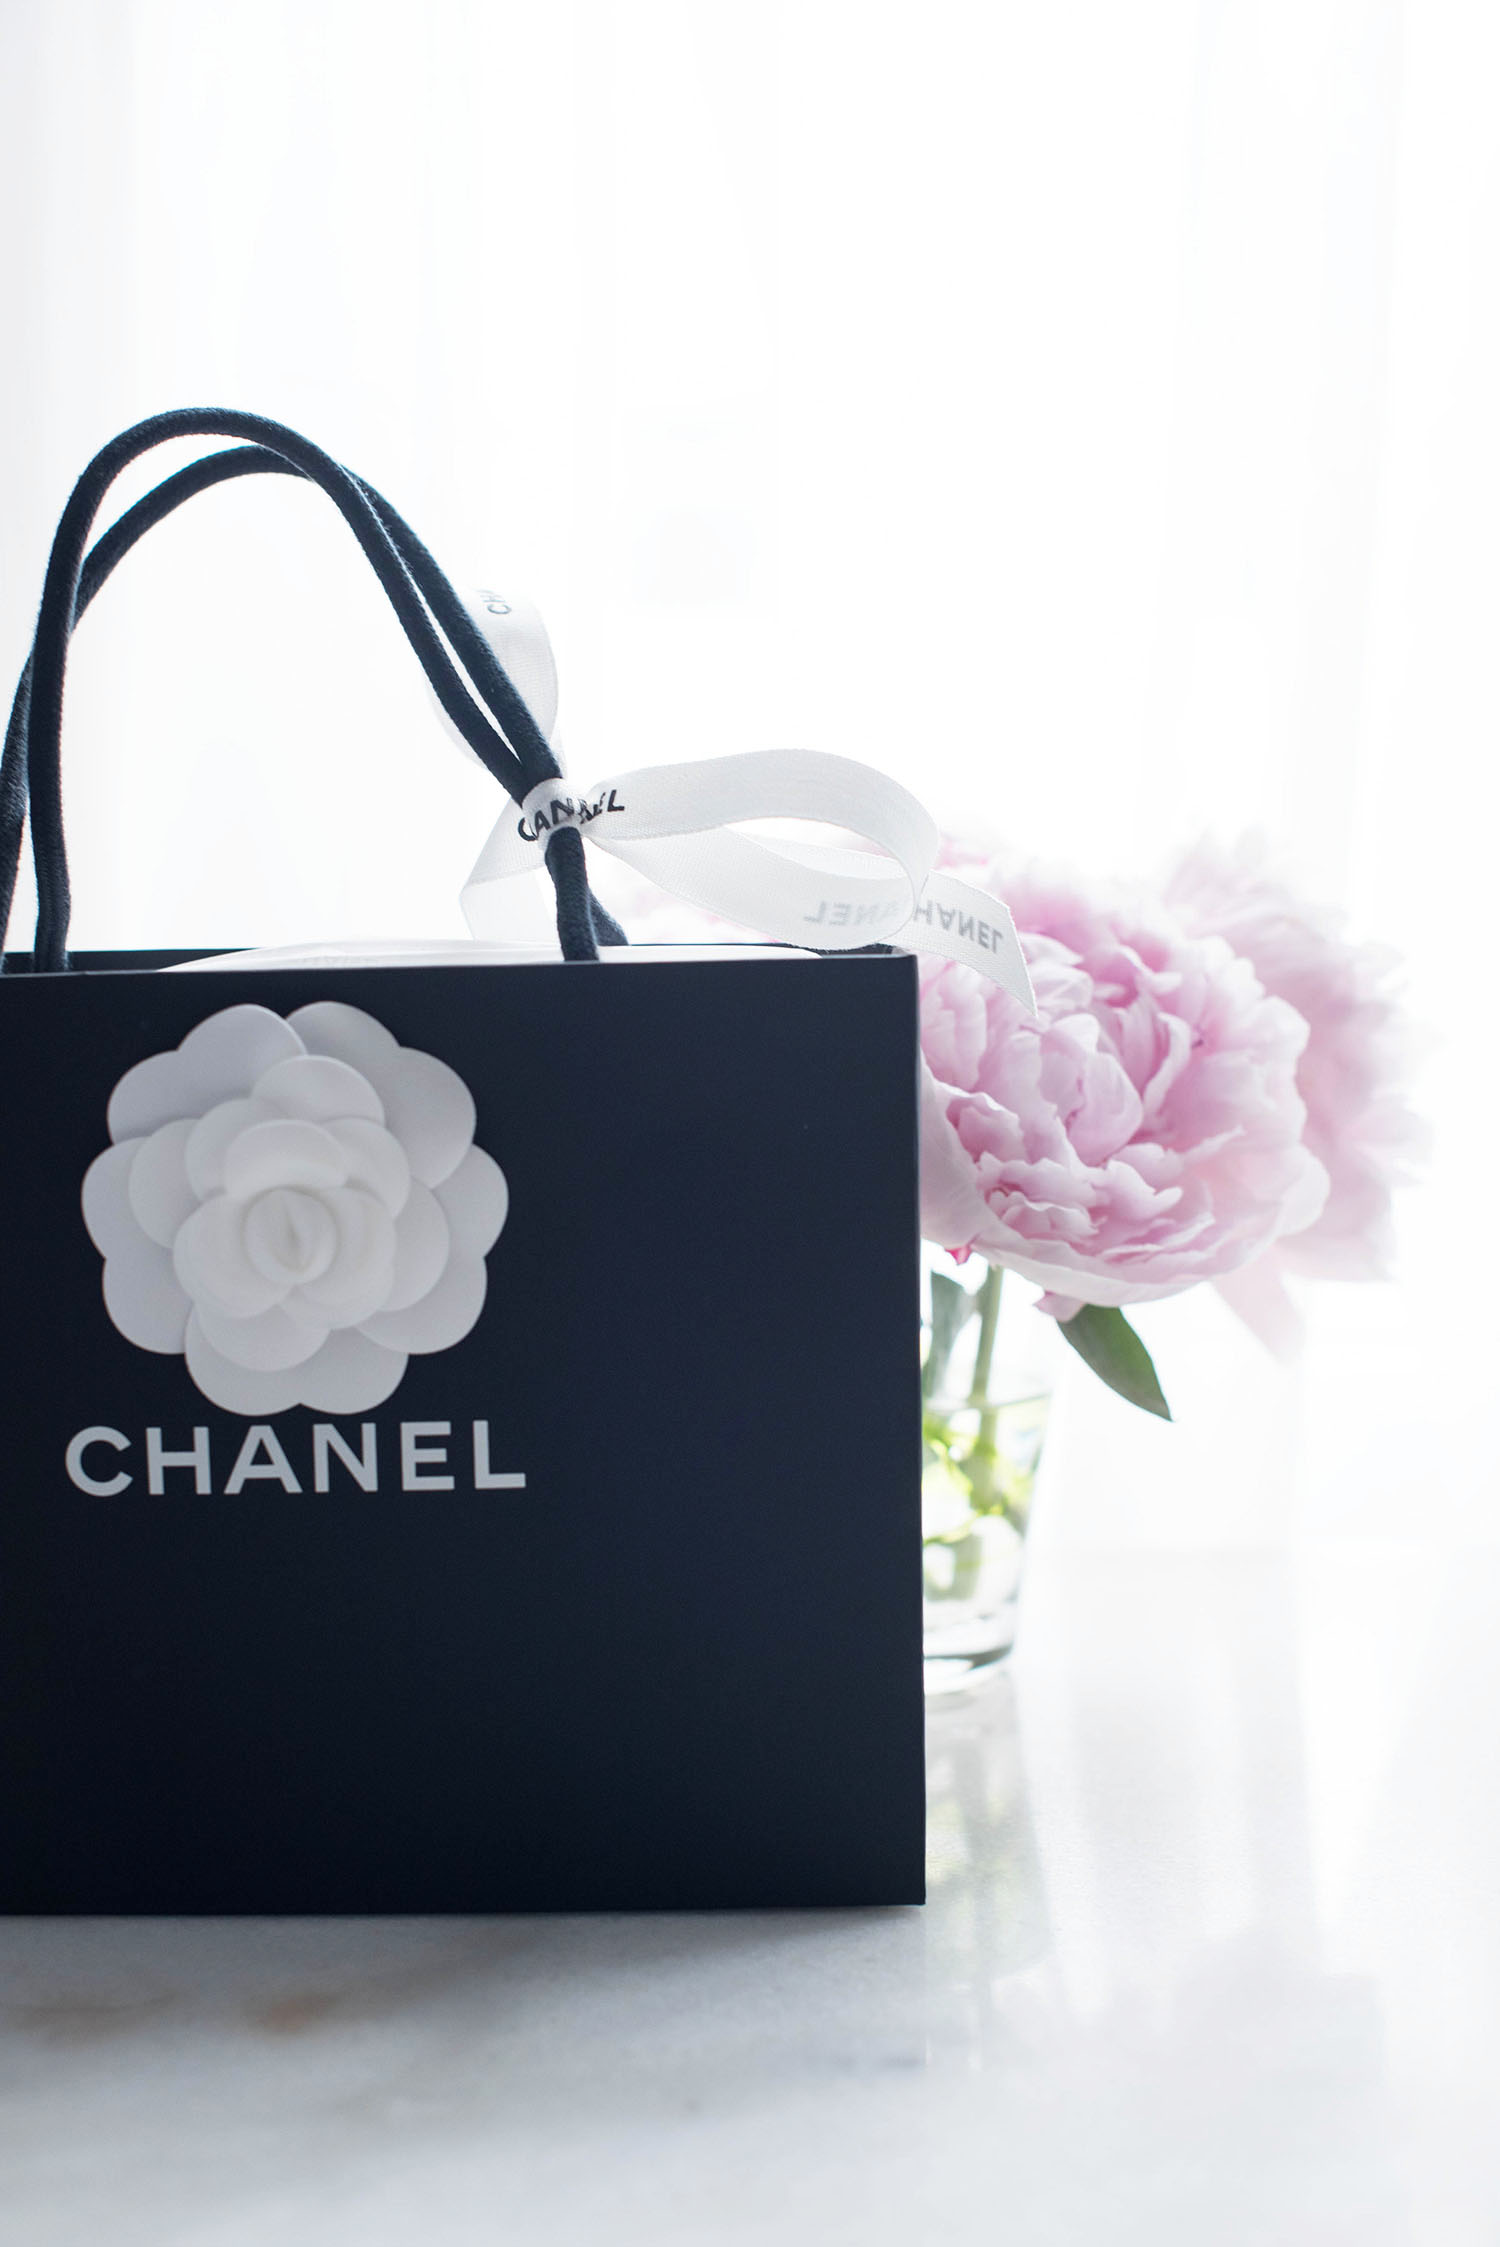 A Chanel shopping bag displayed with pink peonies on a marble table by fashion blogger Cee Fardoe of Coco & Vera